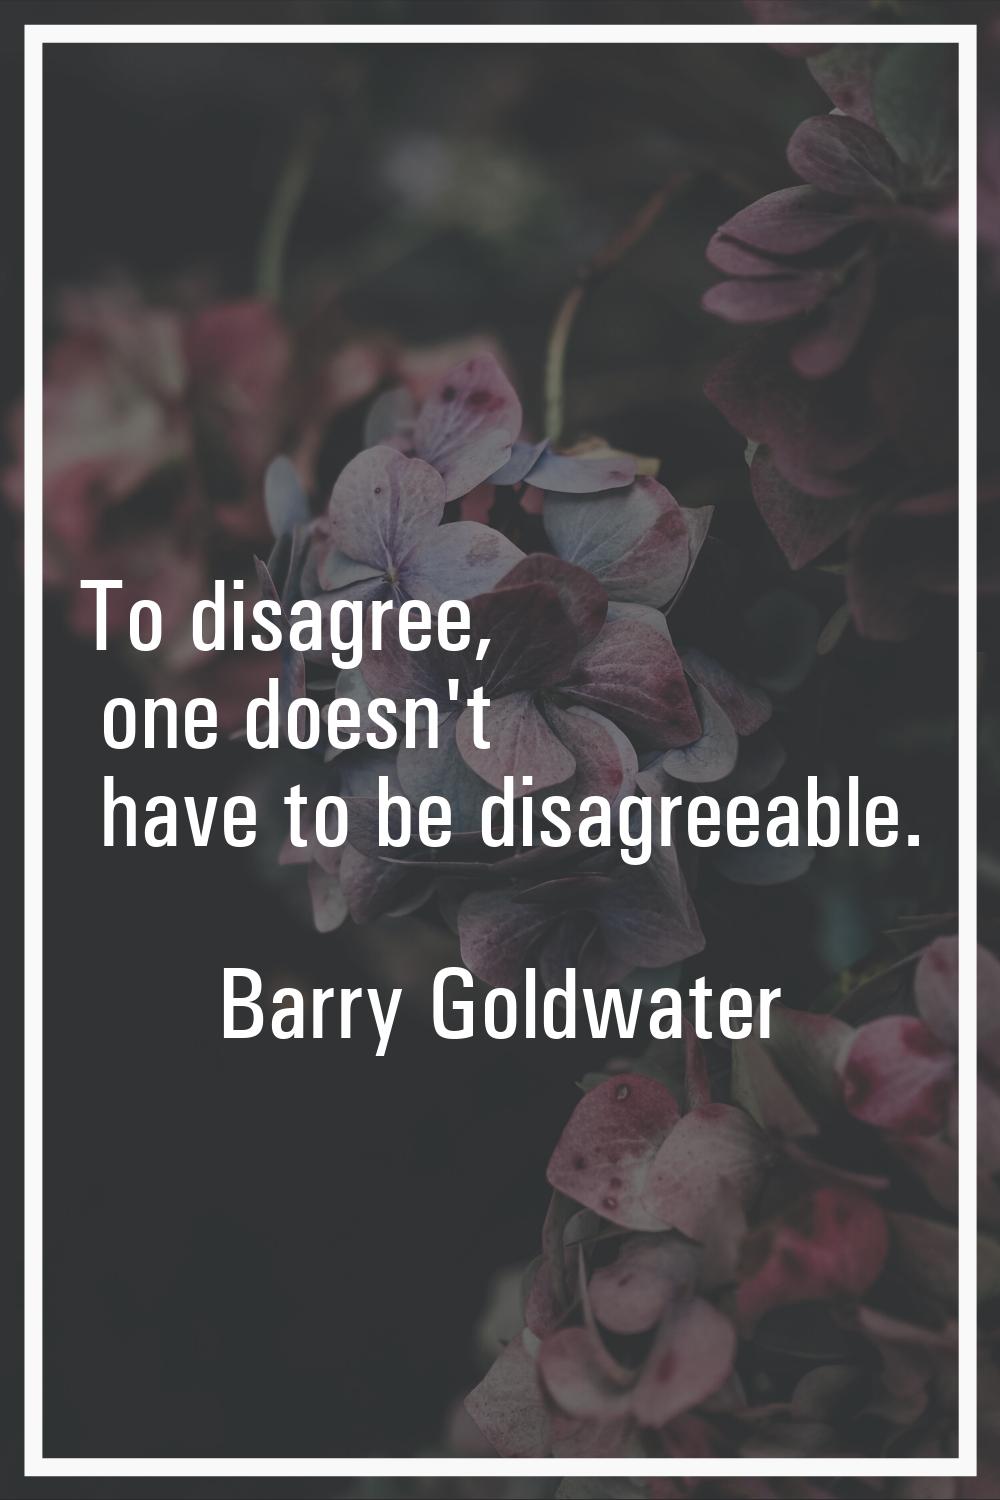 To disagree, one doesn't have to be disagreeable.